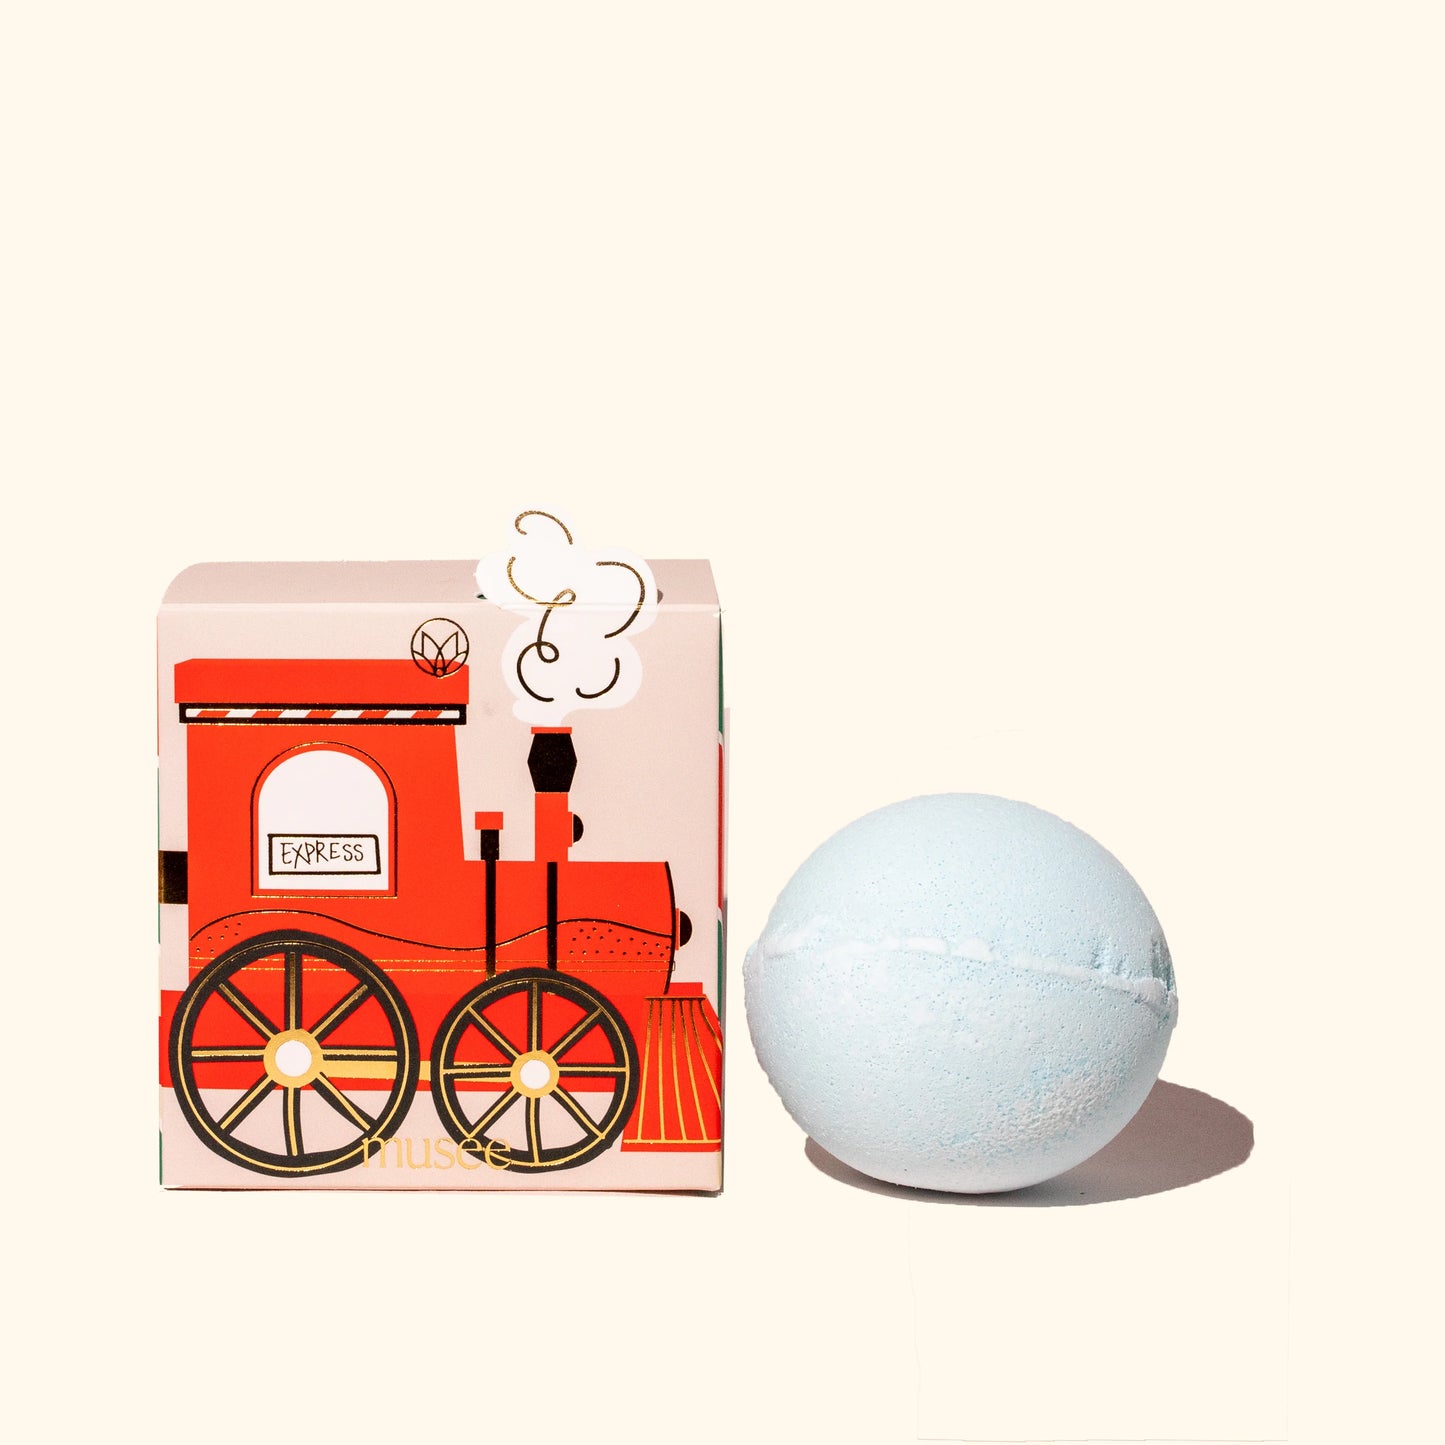 A Musee Train Bath Balm with a train on it next to a box, made with high-quality ingredients.